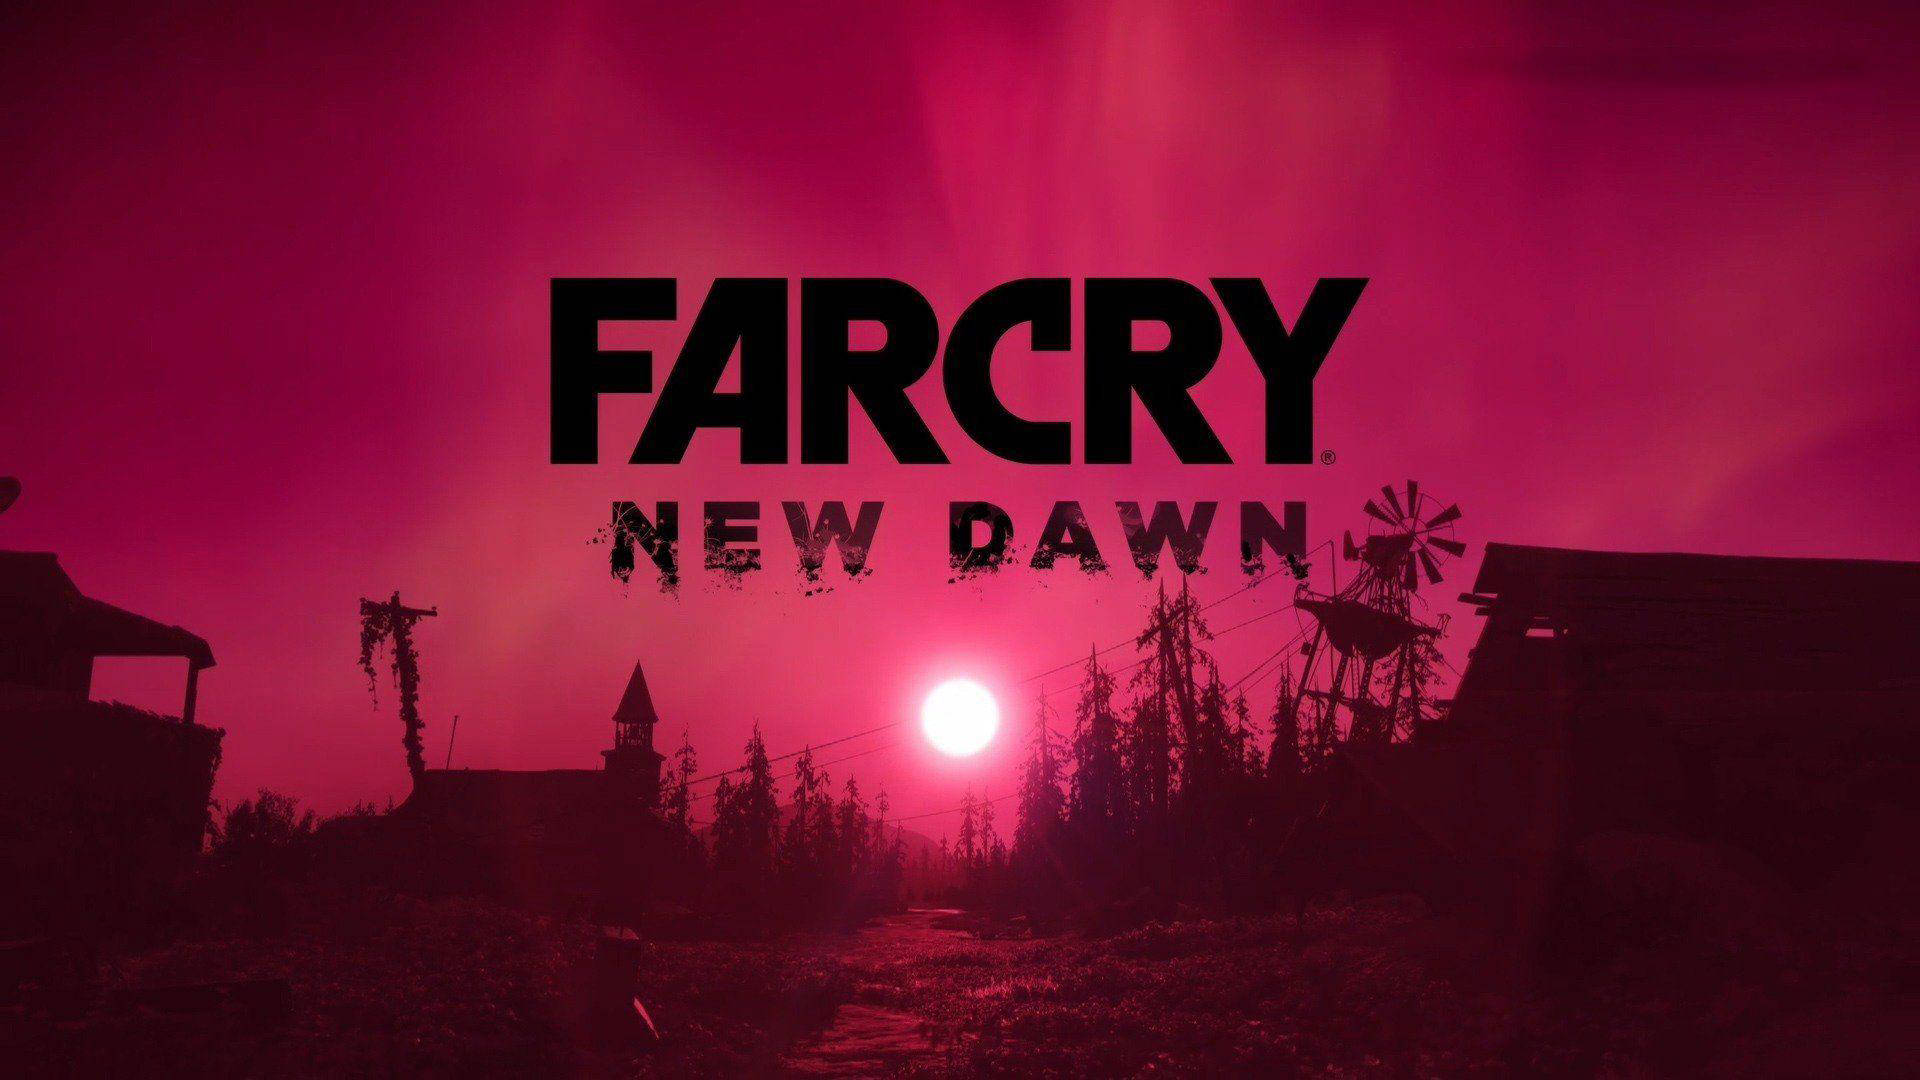 Download Far Cry New Dawn Pink Poster Wallpaper 